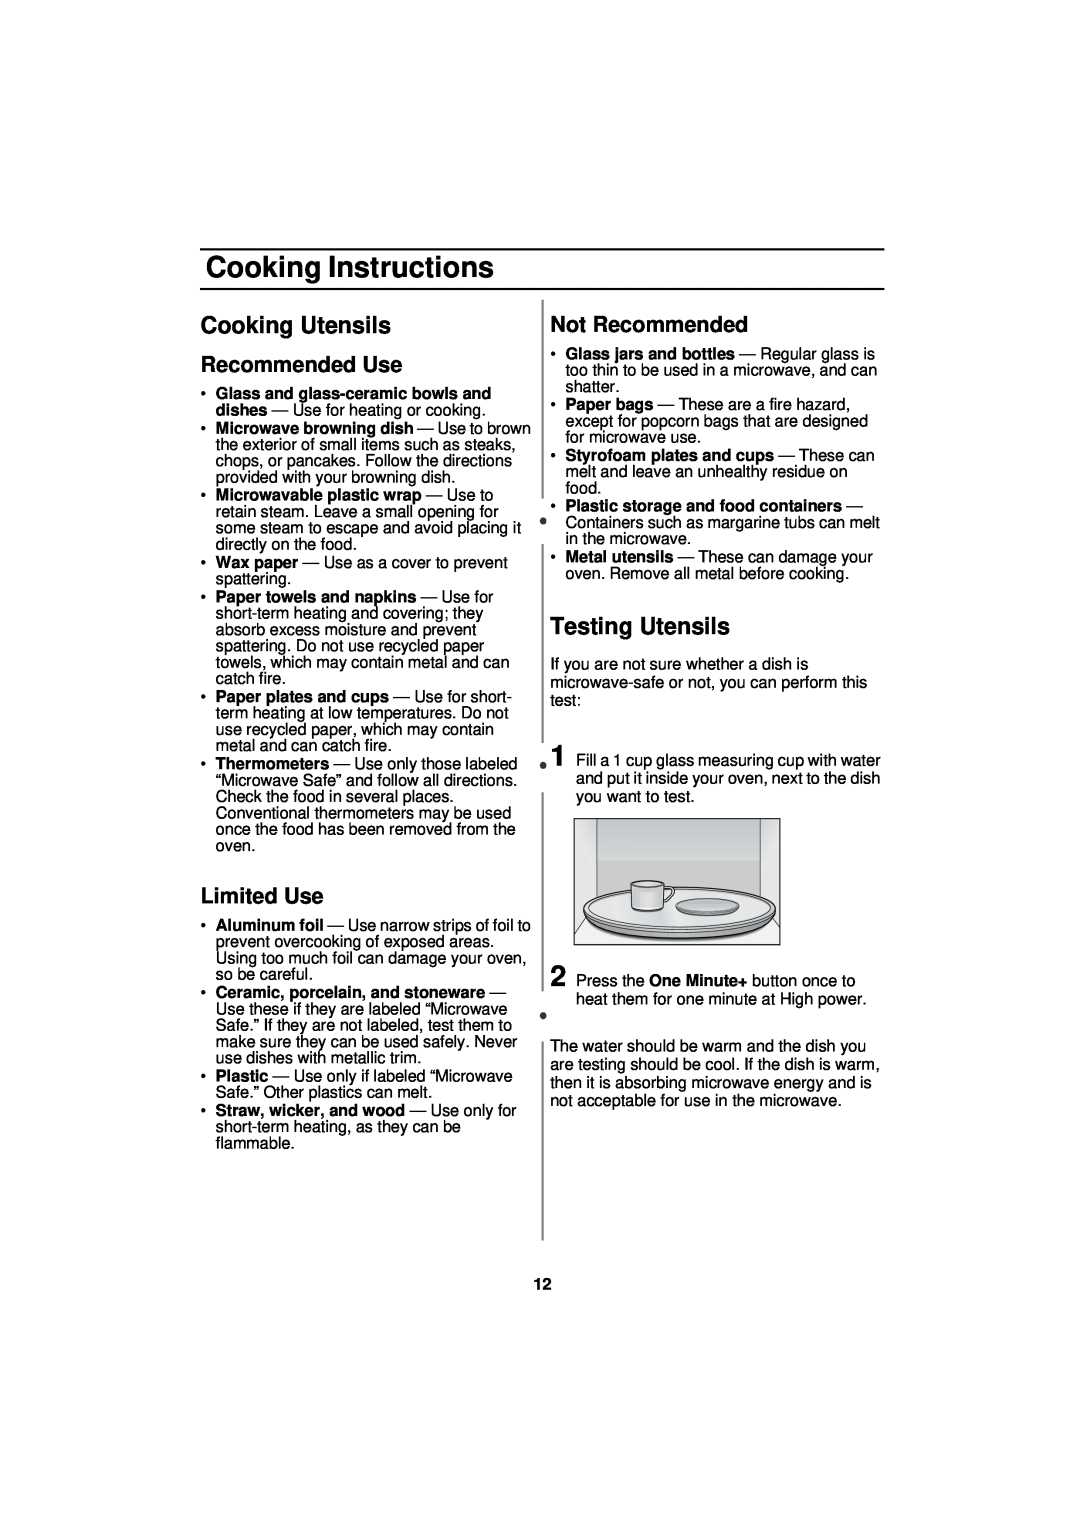 Samsung DE68-01931A-01 manual Cooking Instructions, Cooking Utensils, Testing Utensils, Recommended Use, Limited Use 